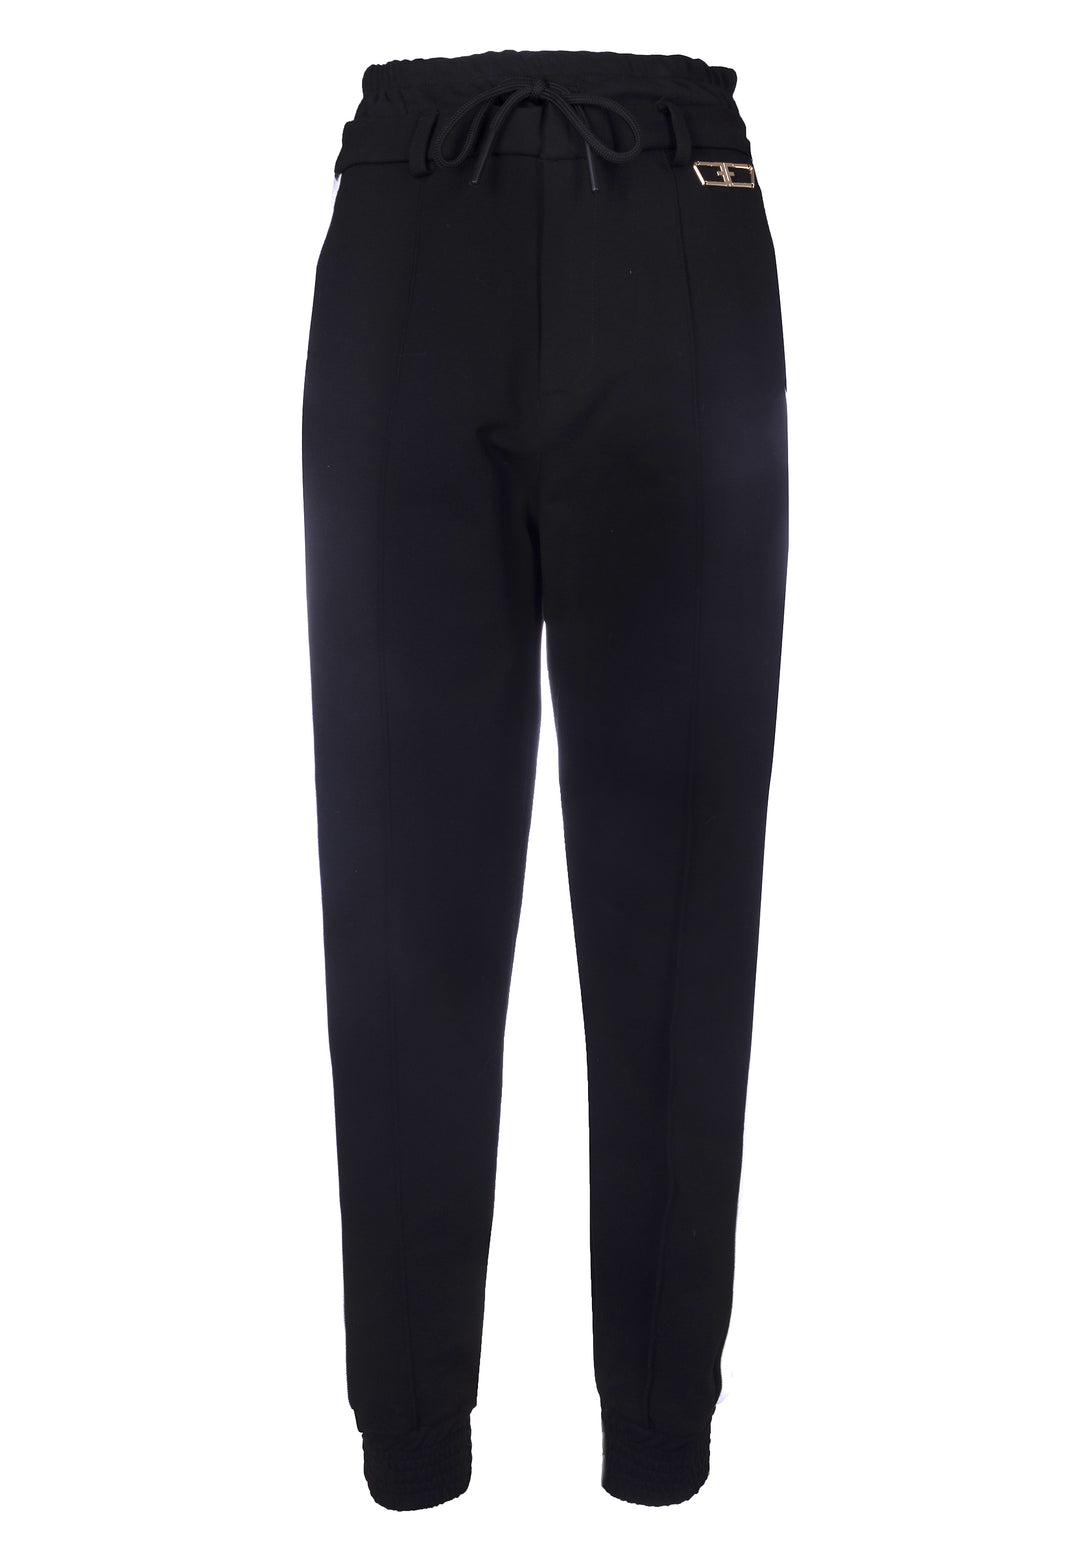 Jogger pant regular fit with side bands